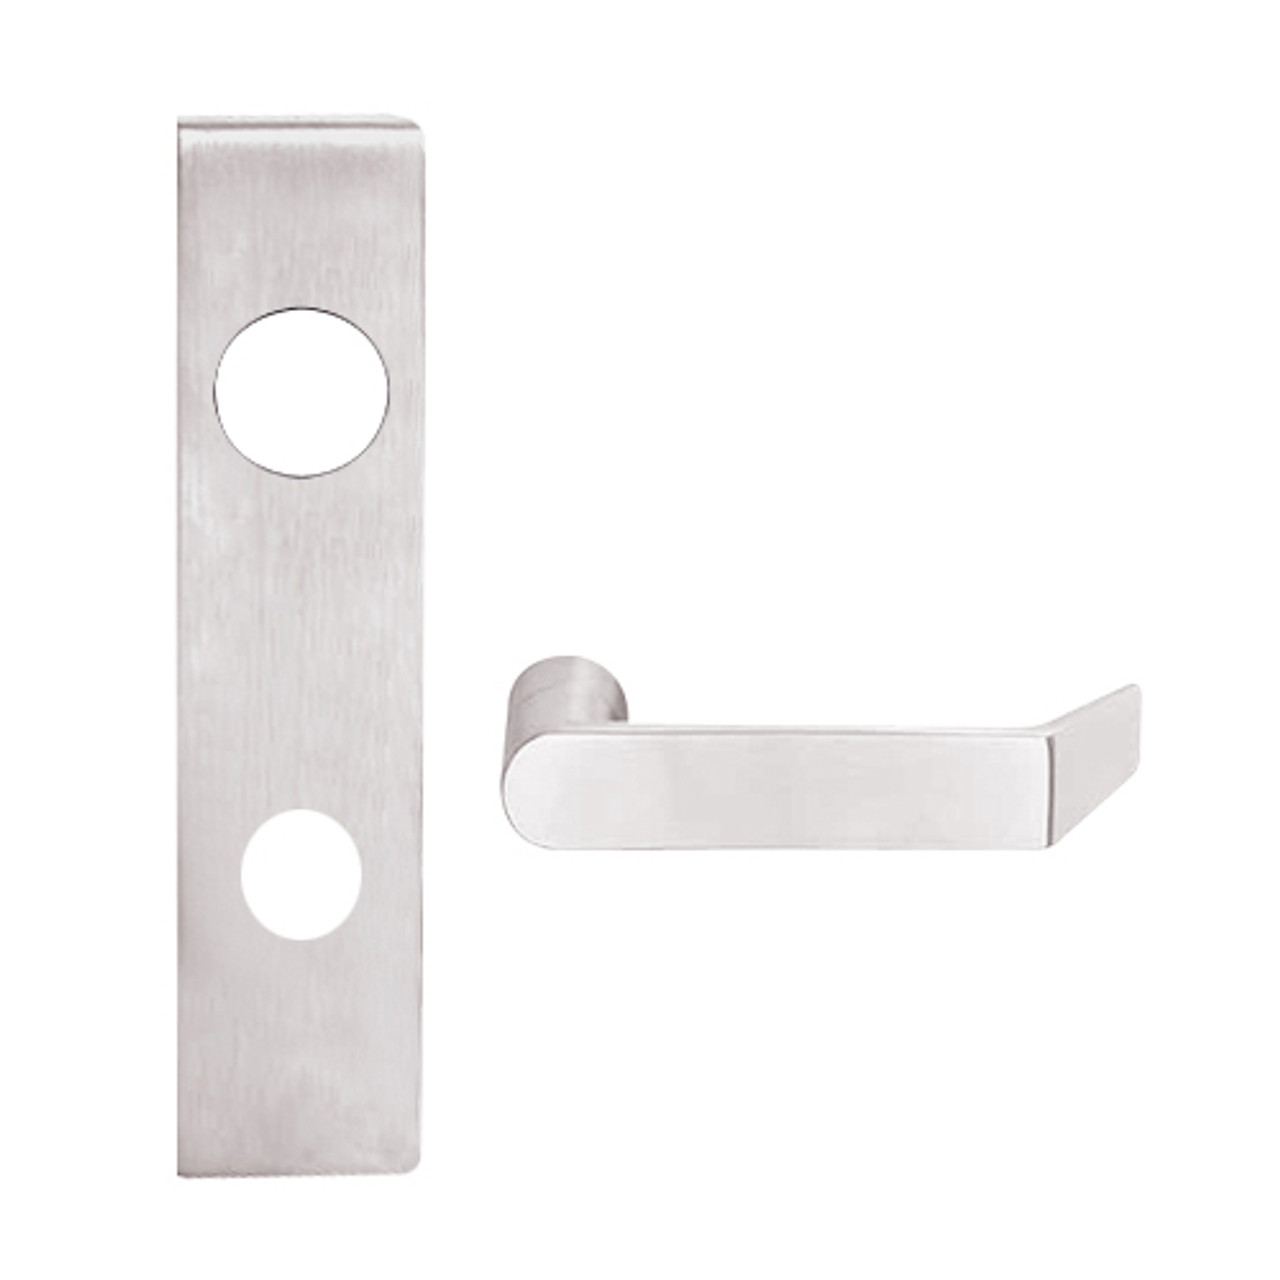 L9456J-06L-629 Schlage L Series Corridor with Deadbolt Commercial Mortise Lock with 06 Cast Lever Design Prepped for FSIC in Bright Stainless Steel